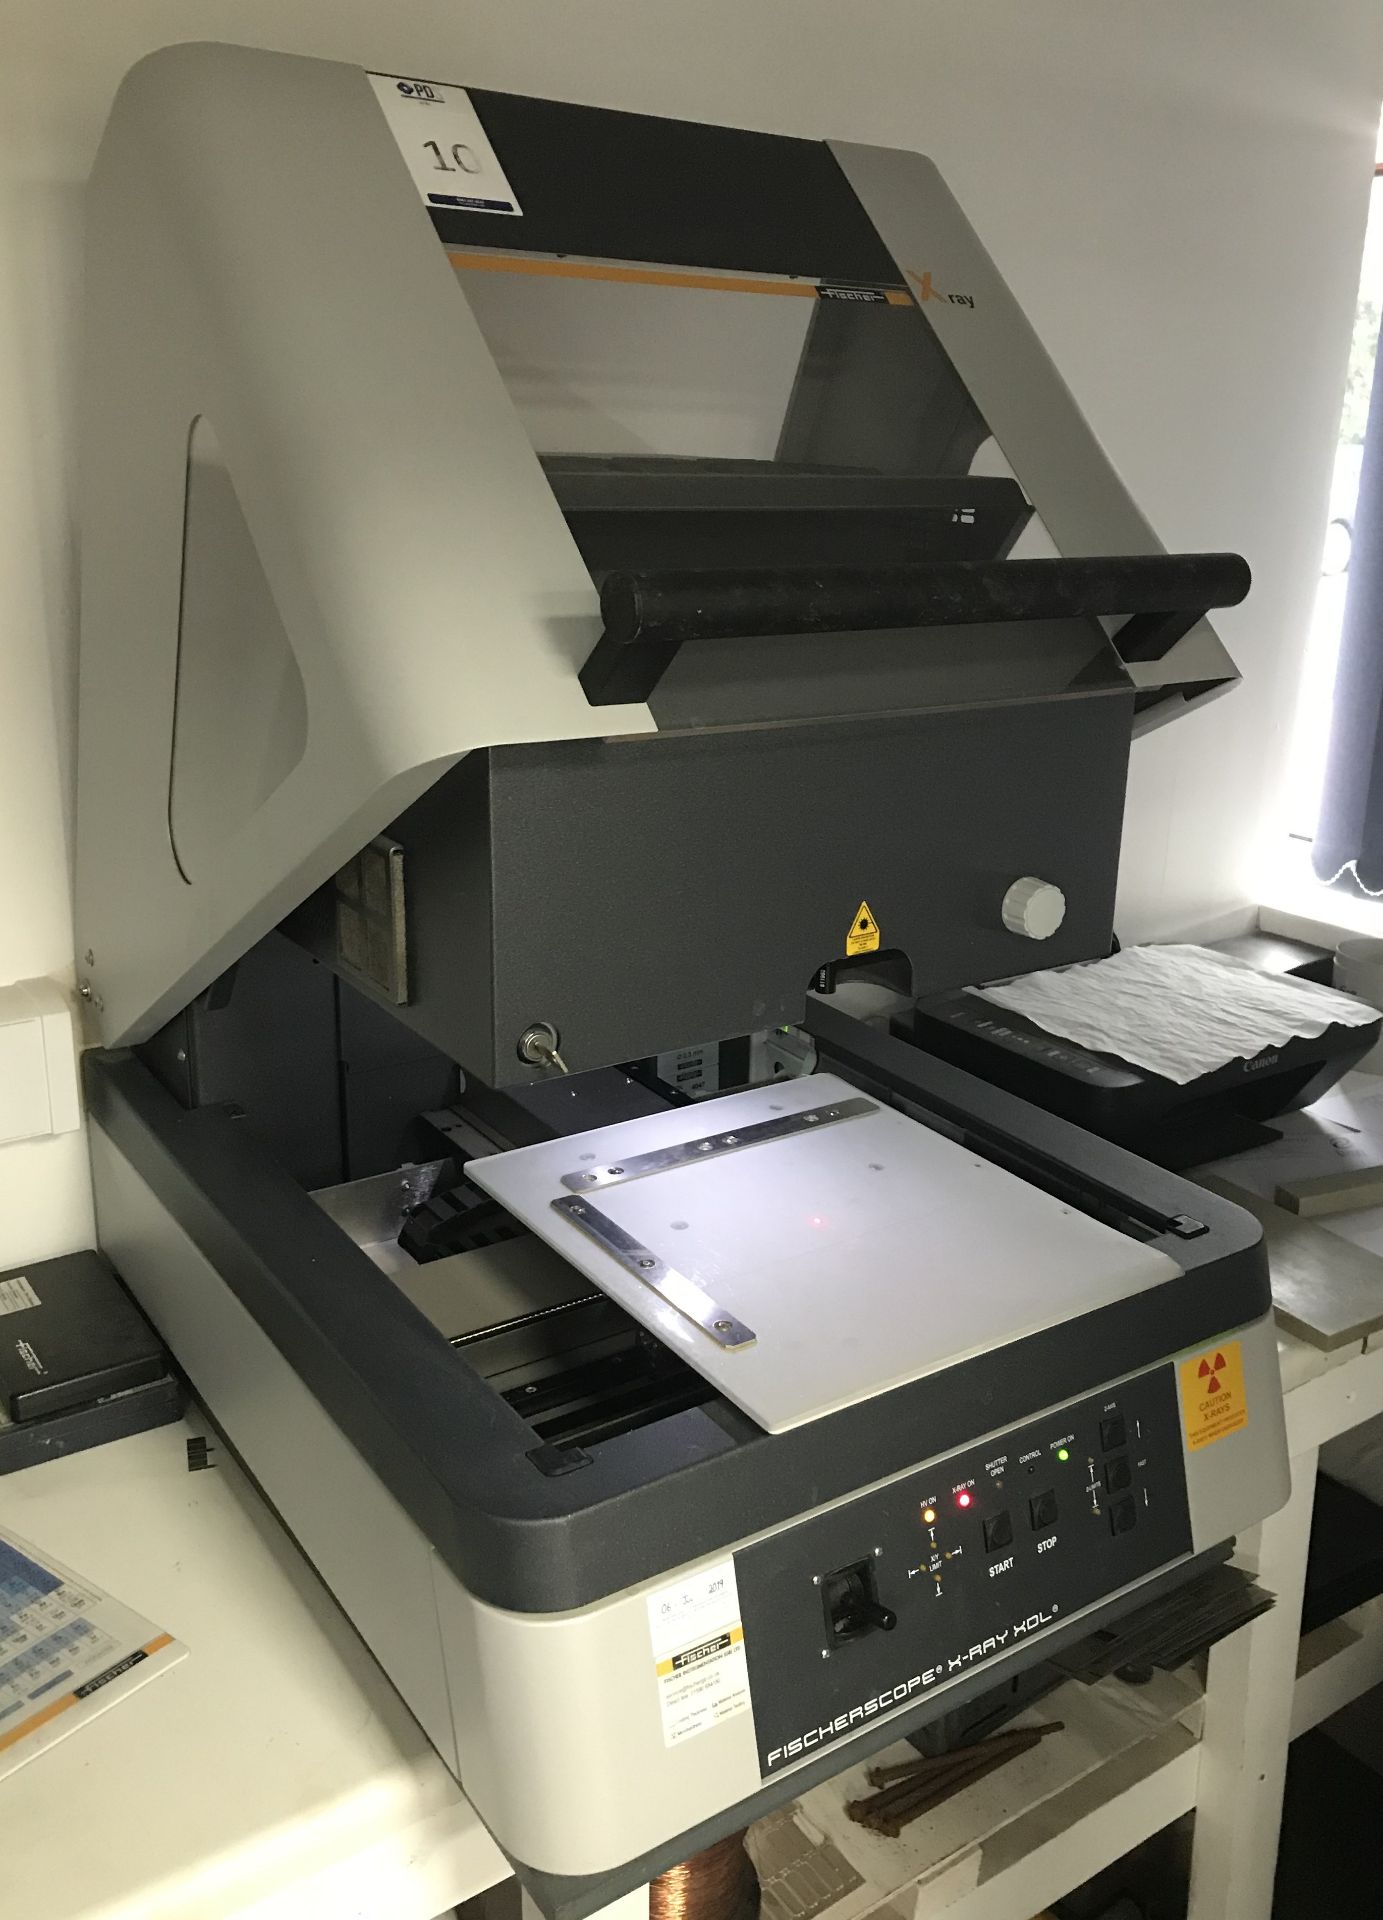 Fischerscope X-Ray Machine XDL-240, Calibrated 6th July 2019, Serial Number: 000084021 Comprising: - Image 2 of 4